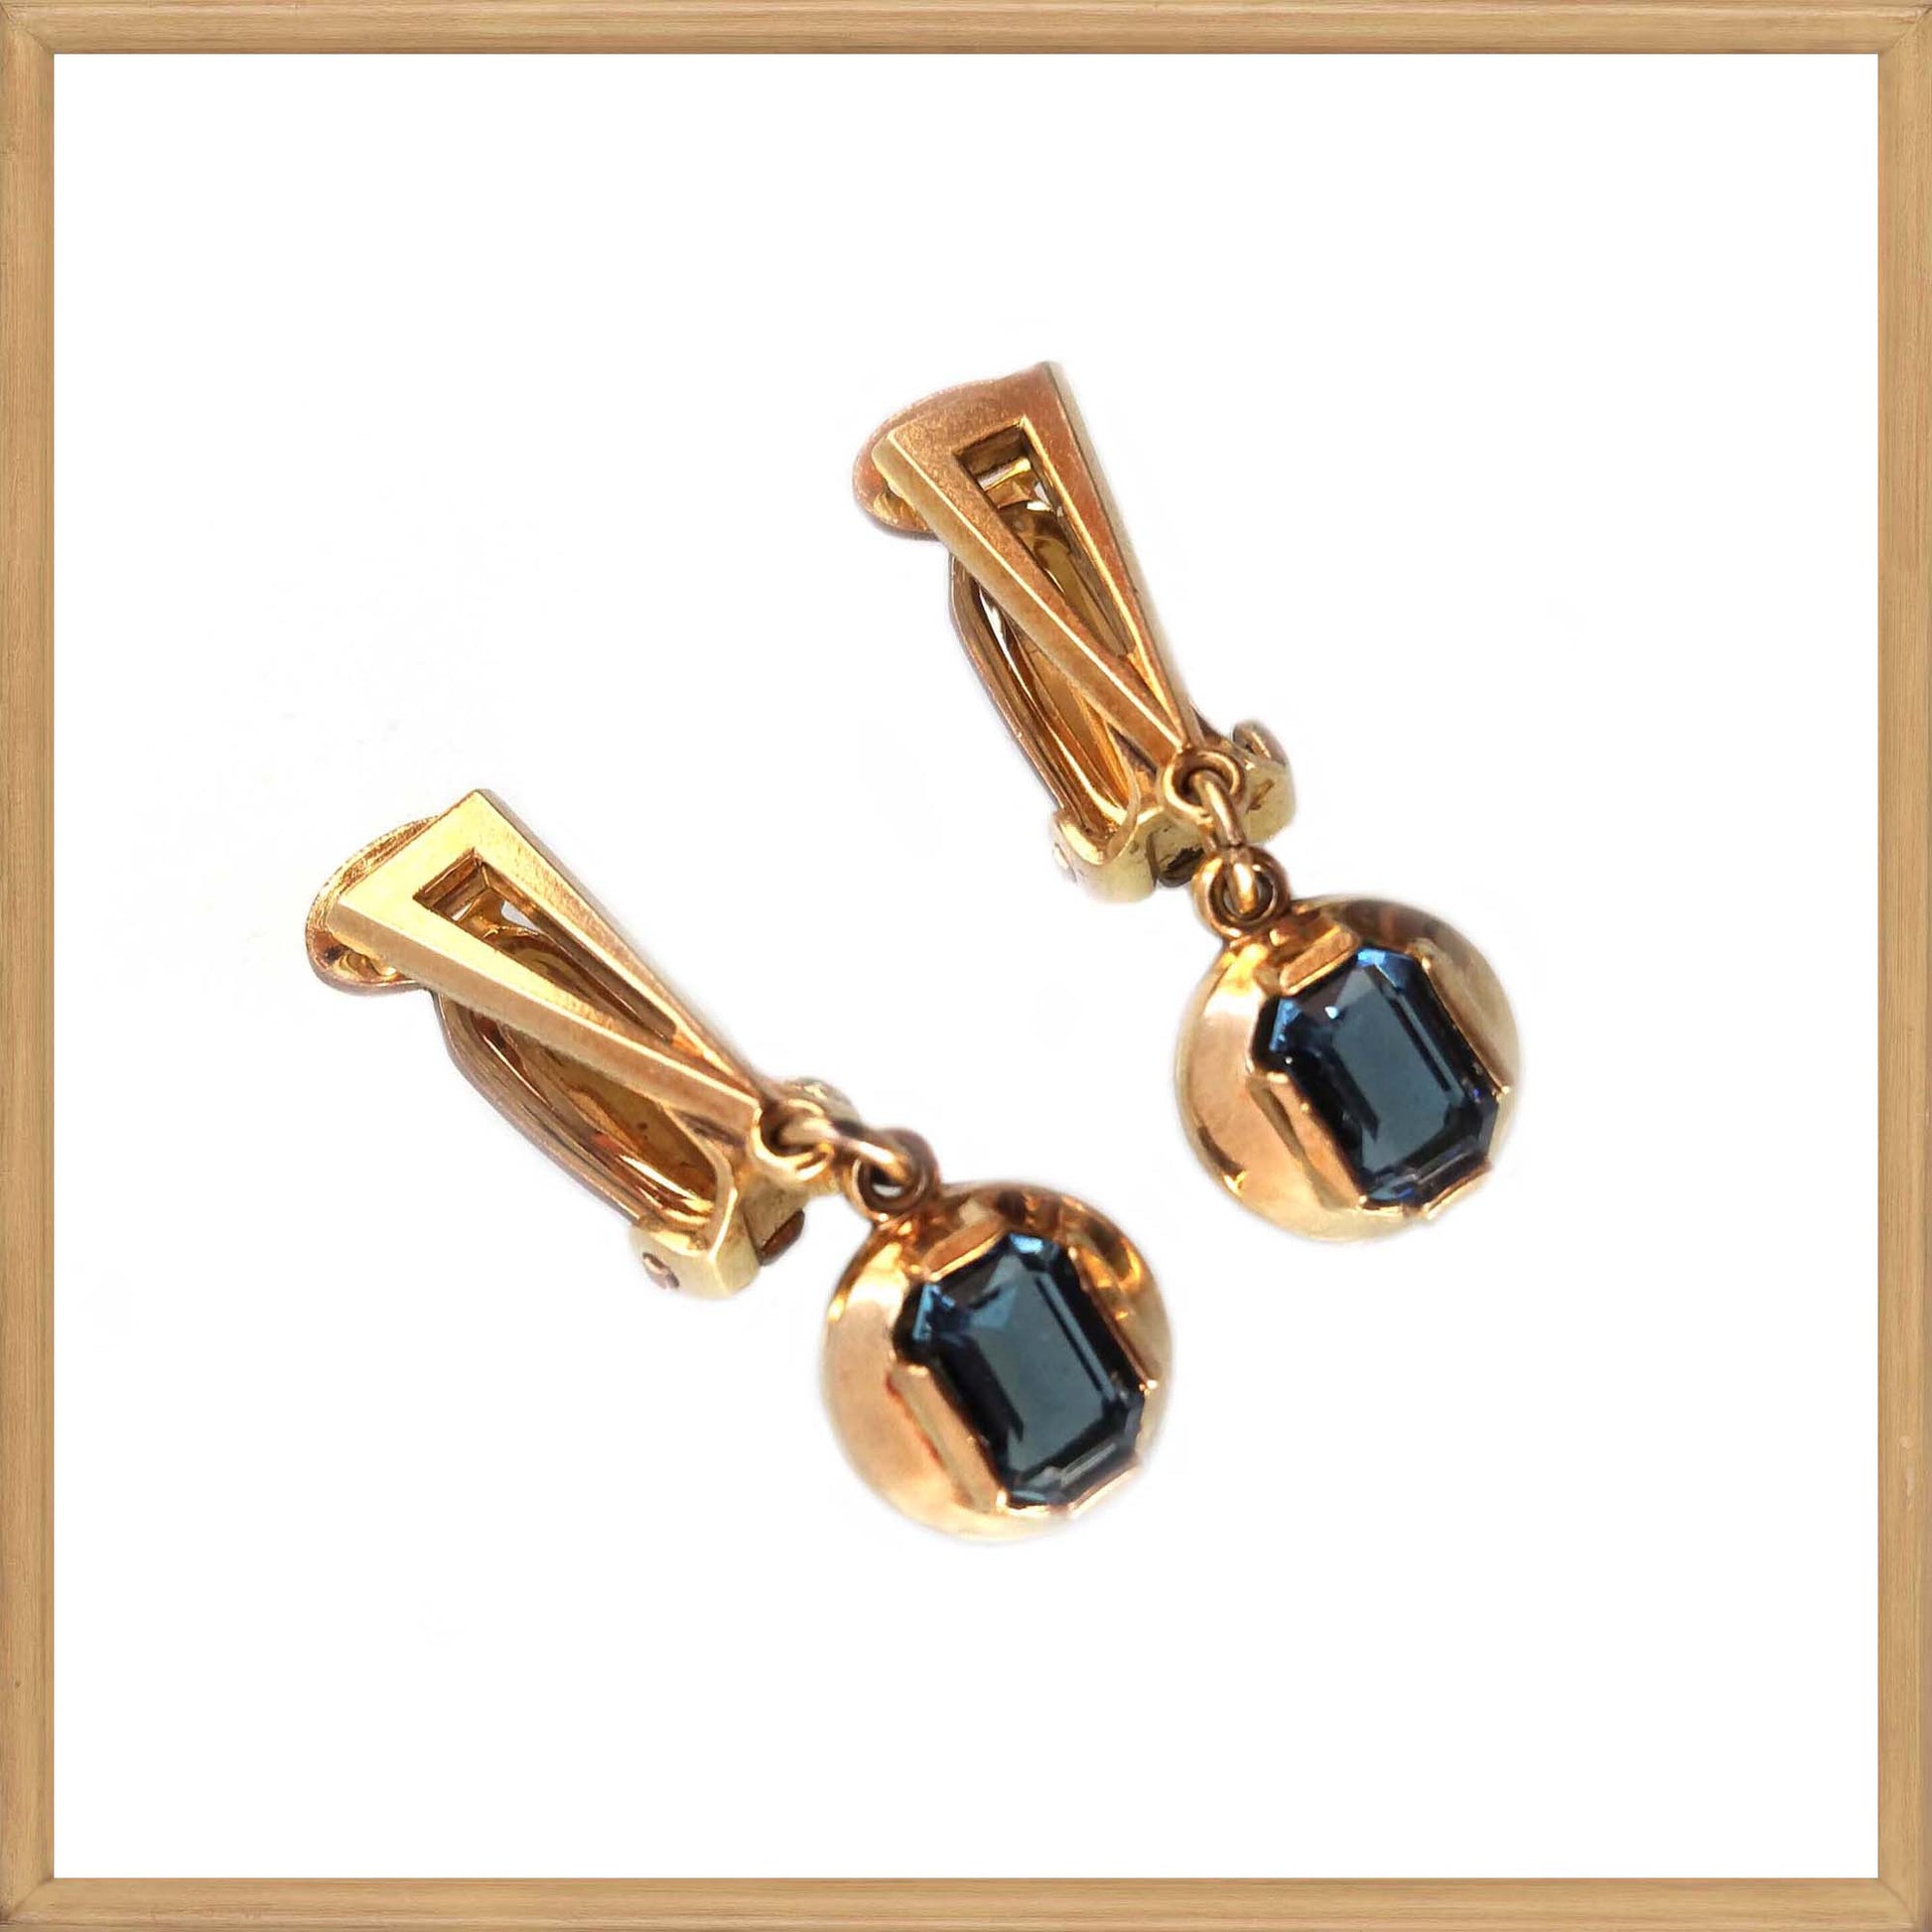 14k Rolled Gold Clip on Earrings by Kordes and Lichtenfels